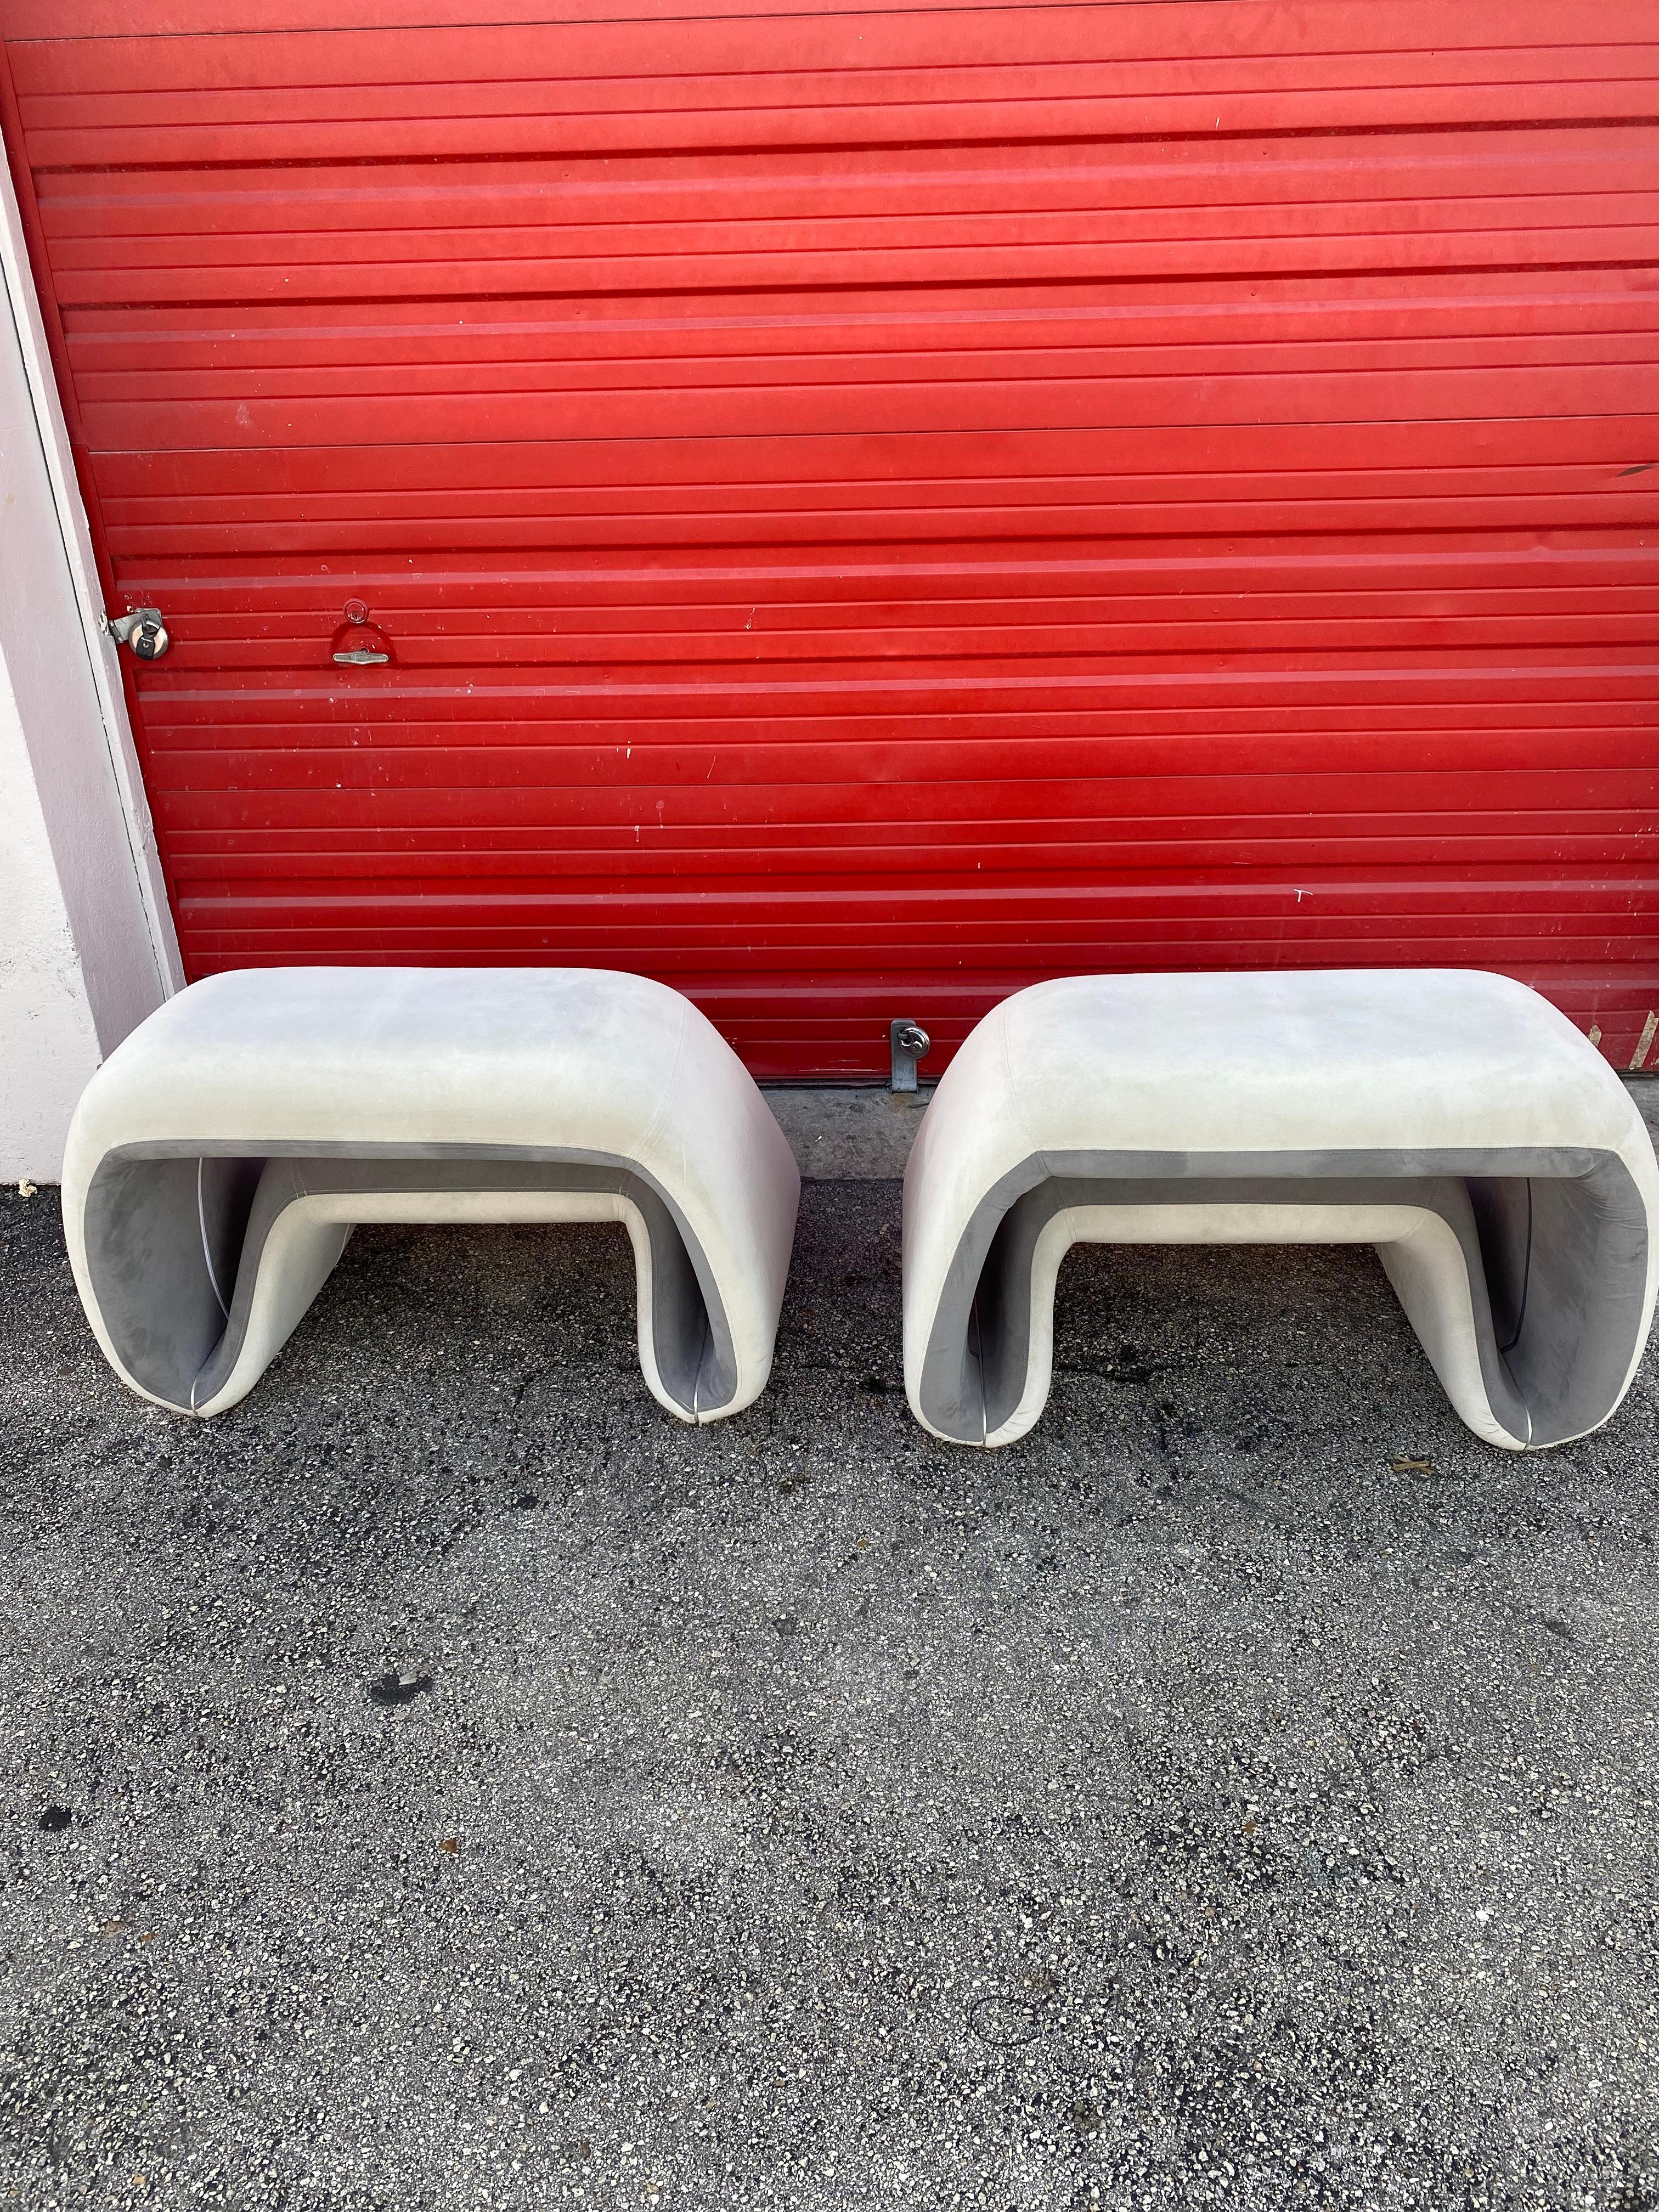 1970s Meritalia Sculptural Space Age Air Loungers Chairs, Set of 2 For Sale 2